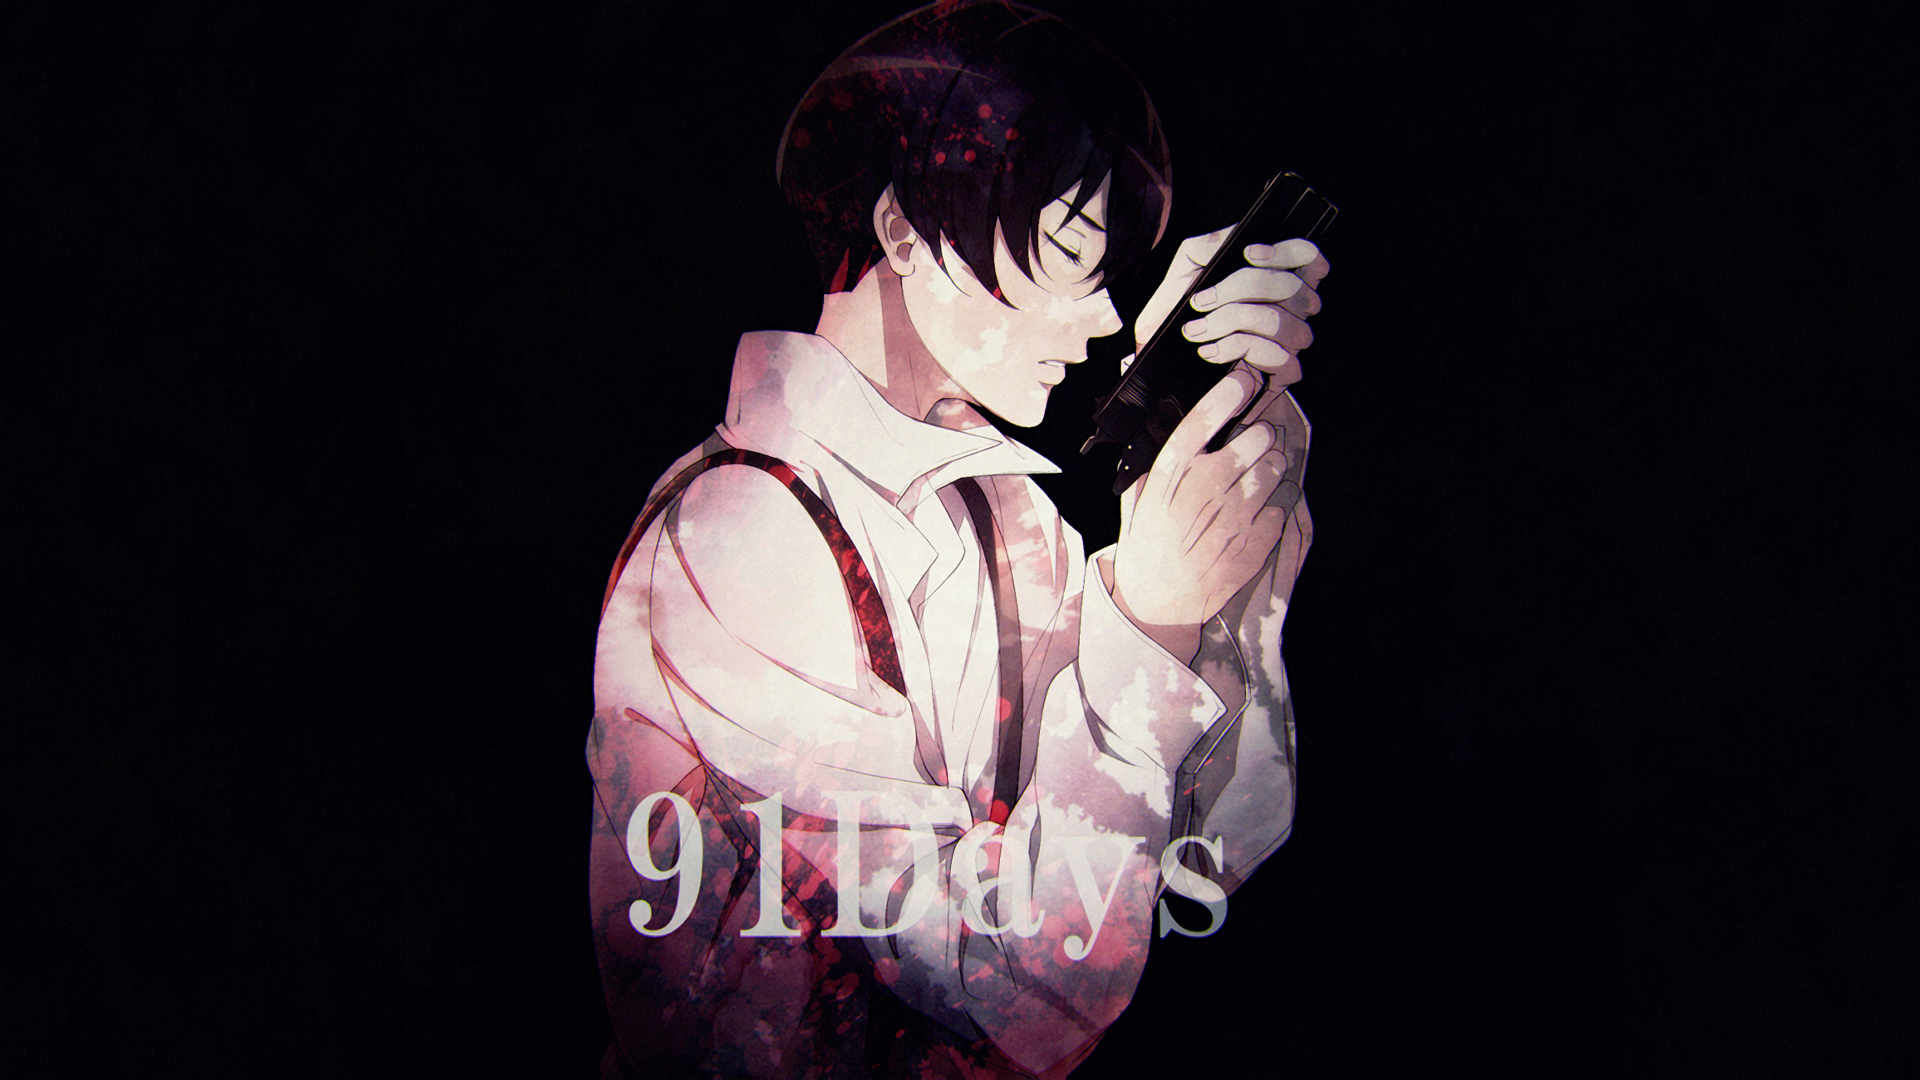 91 Days Wallpapers   Top Free 91 Days Backgrounds